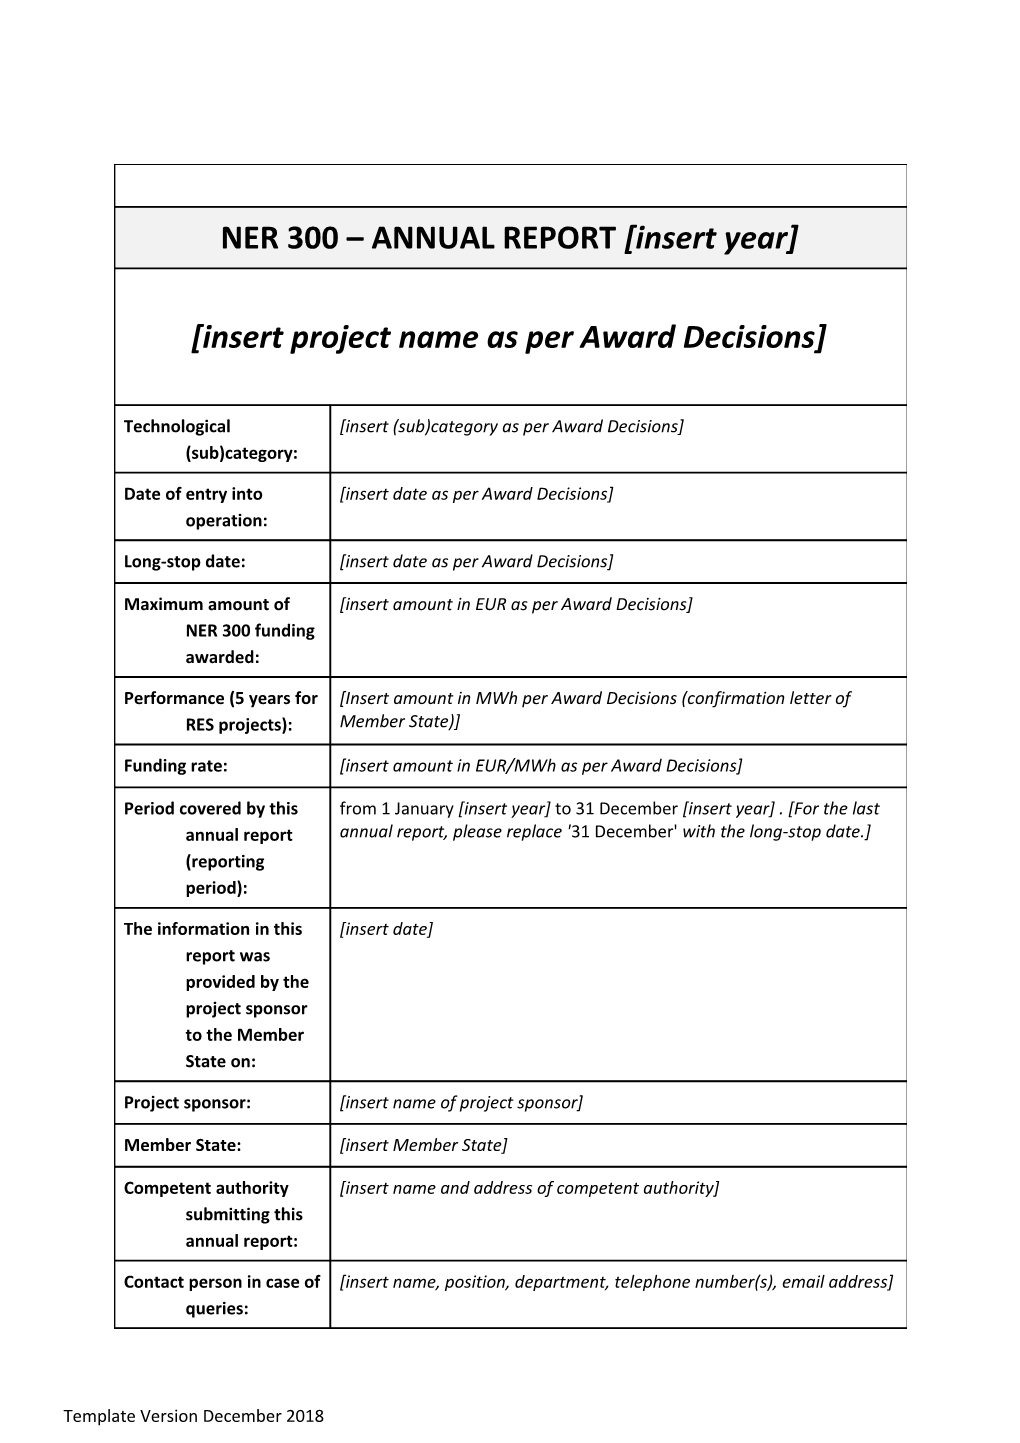 Annual Report on Insert Project Name Reporting Year: Insert Year Reported